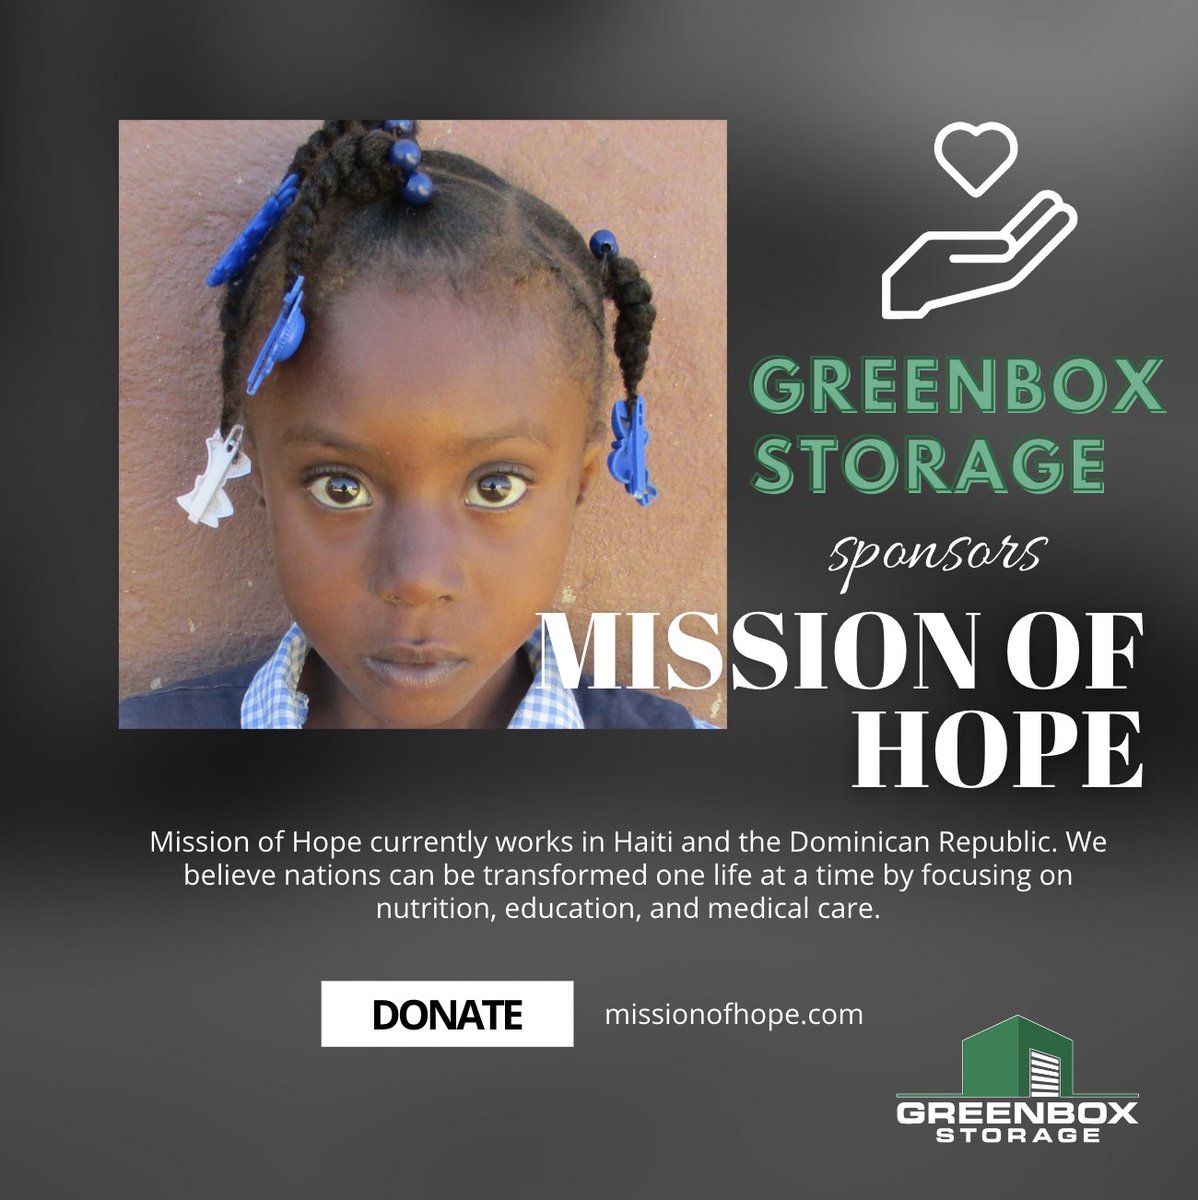 Learn about Middlebury's sponsorship with Mission of Hope! 

Meet Rosena Joseph:
She was born on November 12, 2014. Her mother sells produce from the garden and her father is a mountain vegetable farmer. Donate today at missionofhope.com to help her future!

#missionofhope